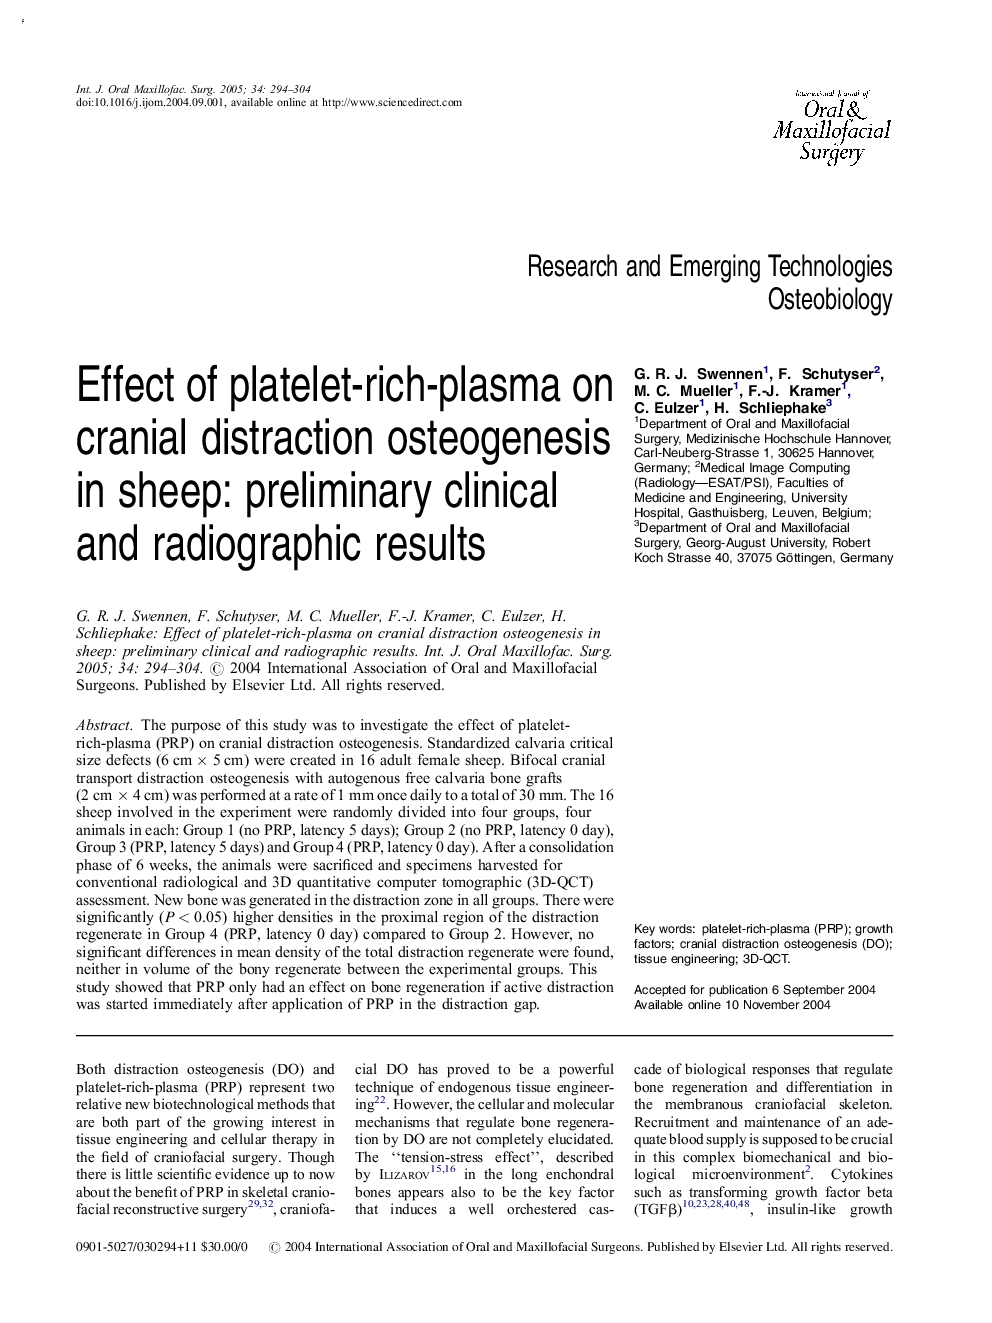 Effect of platelet-rich-plasma on cranial distraction osteogenesis in sheep: preliminary clinical and radiographic results